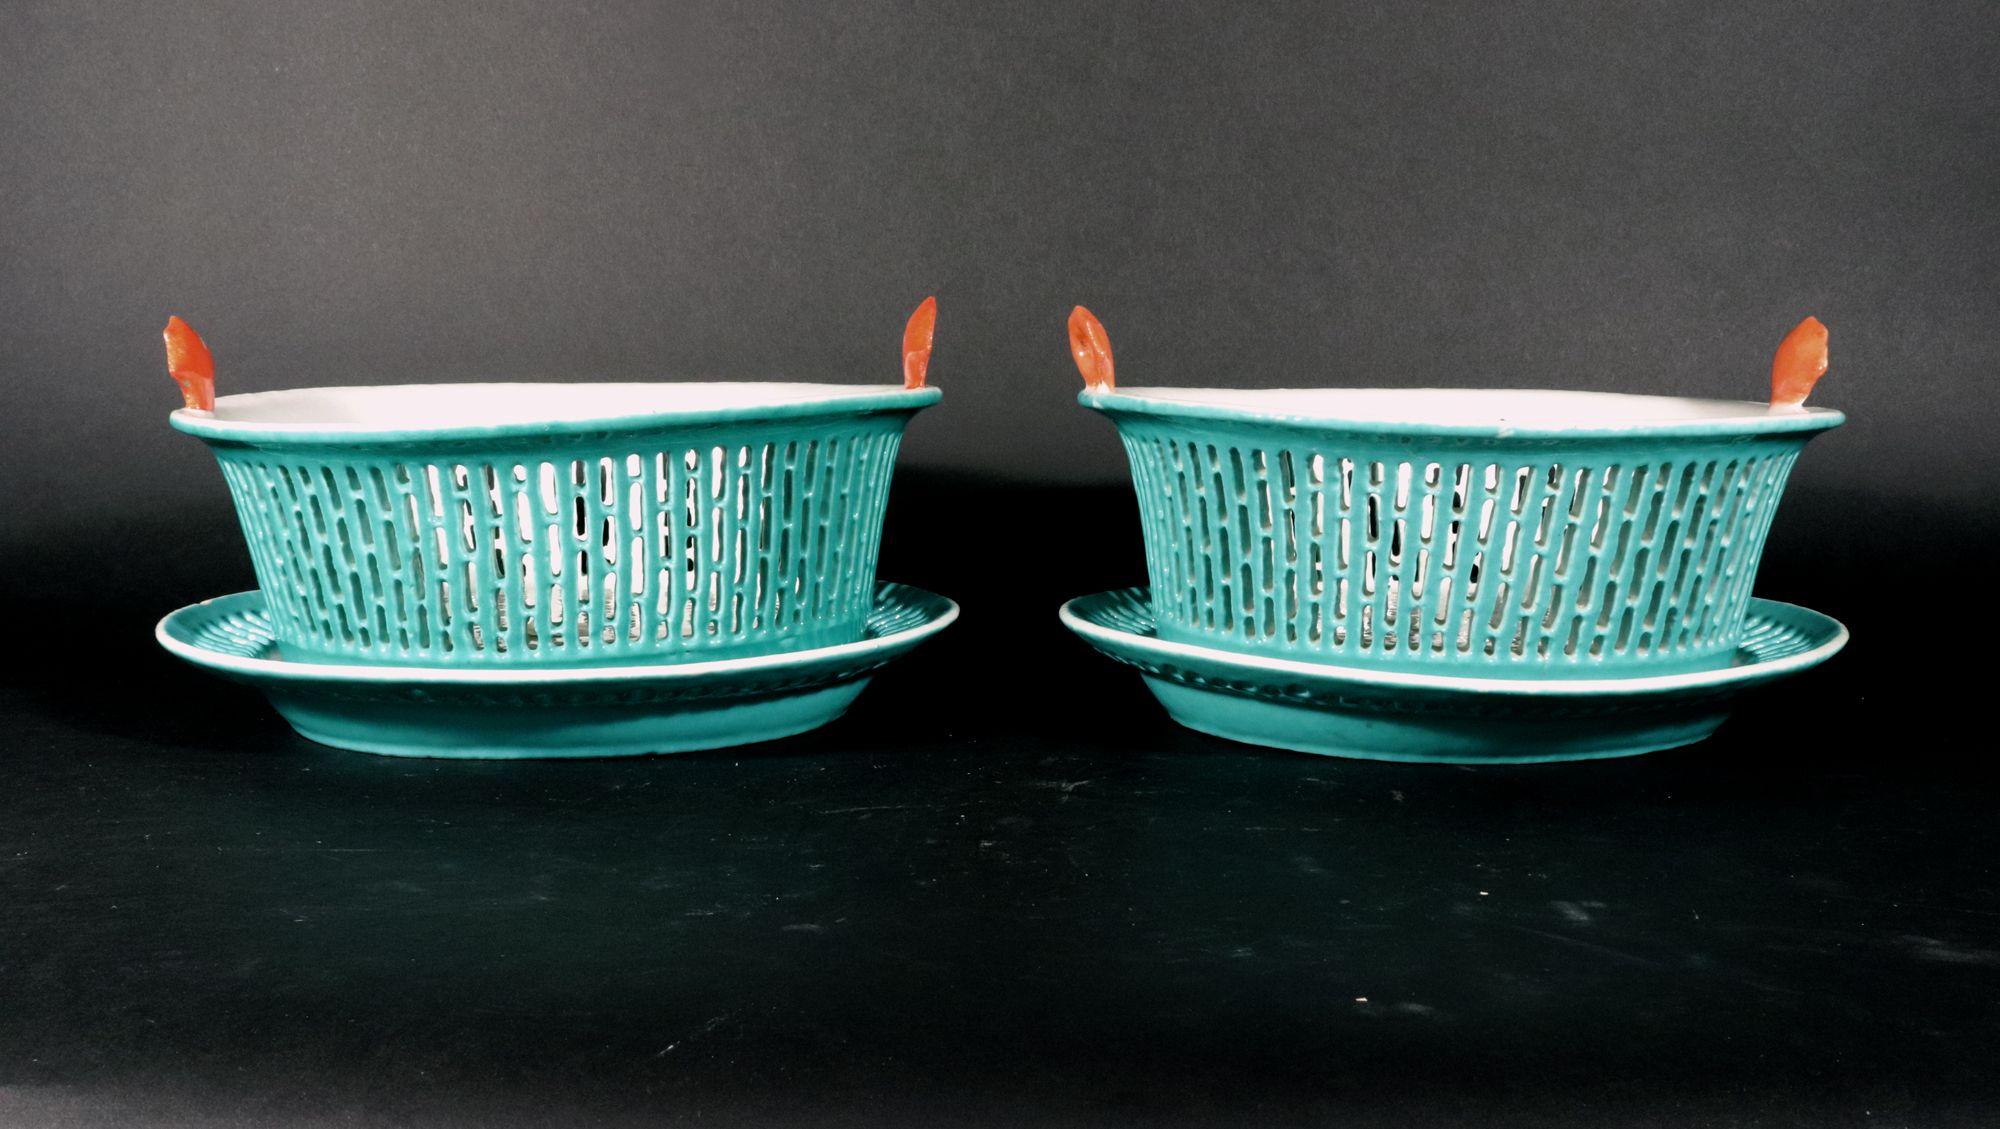 Chinese Export Porcelain Turquoise Openwork Fruit Baskets & Stands,
Circa 1785

The Chinese Export porcelain openwork fruit baskets and stands are painted with an allover turquoise enamel on the exterior and the interior of the basket and the stand